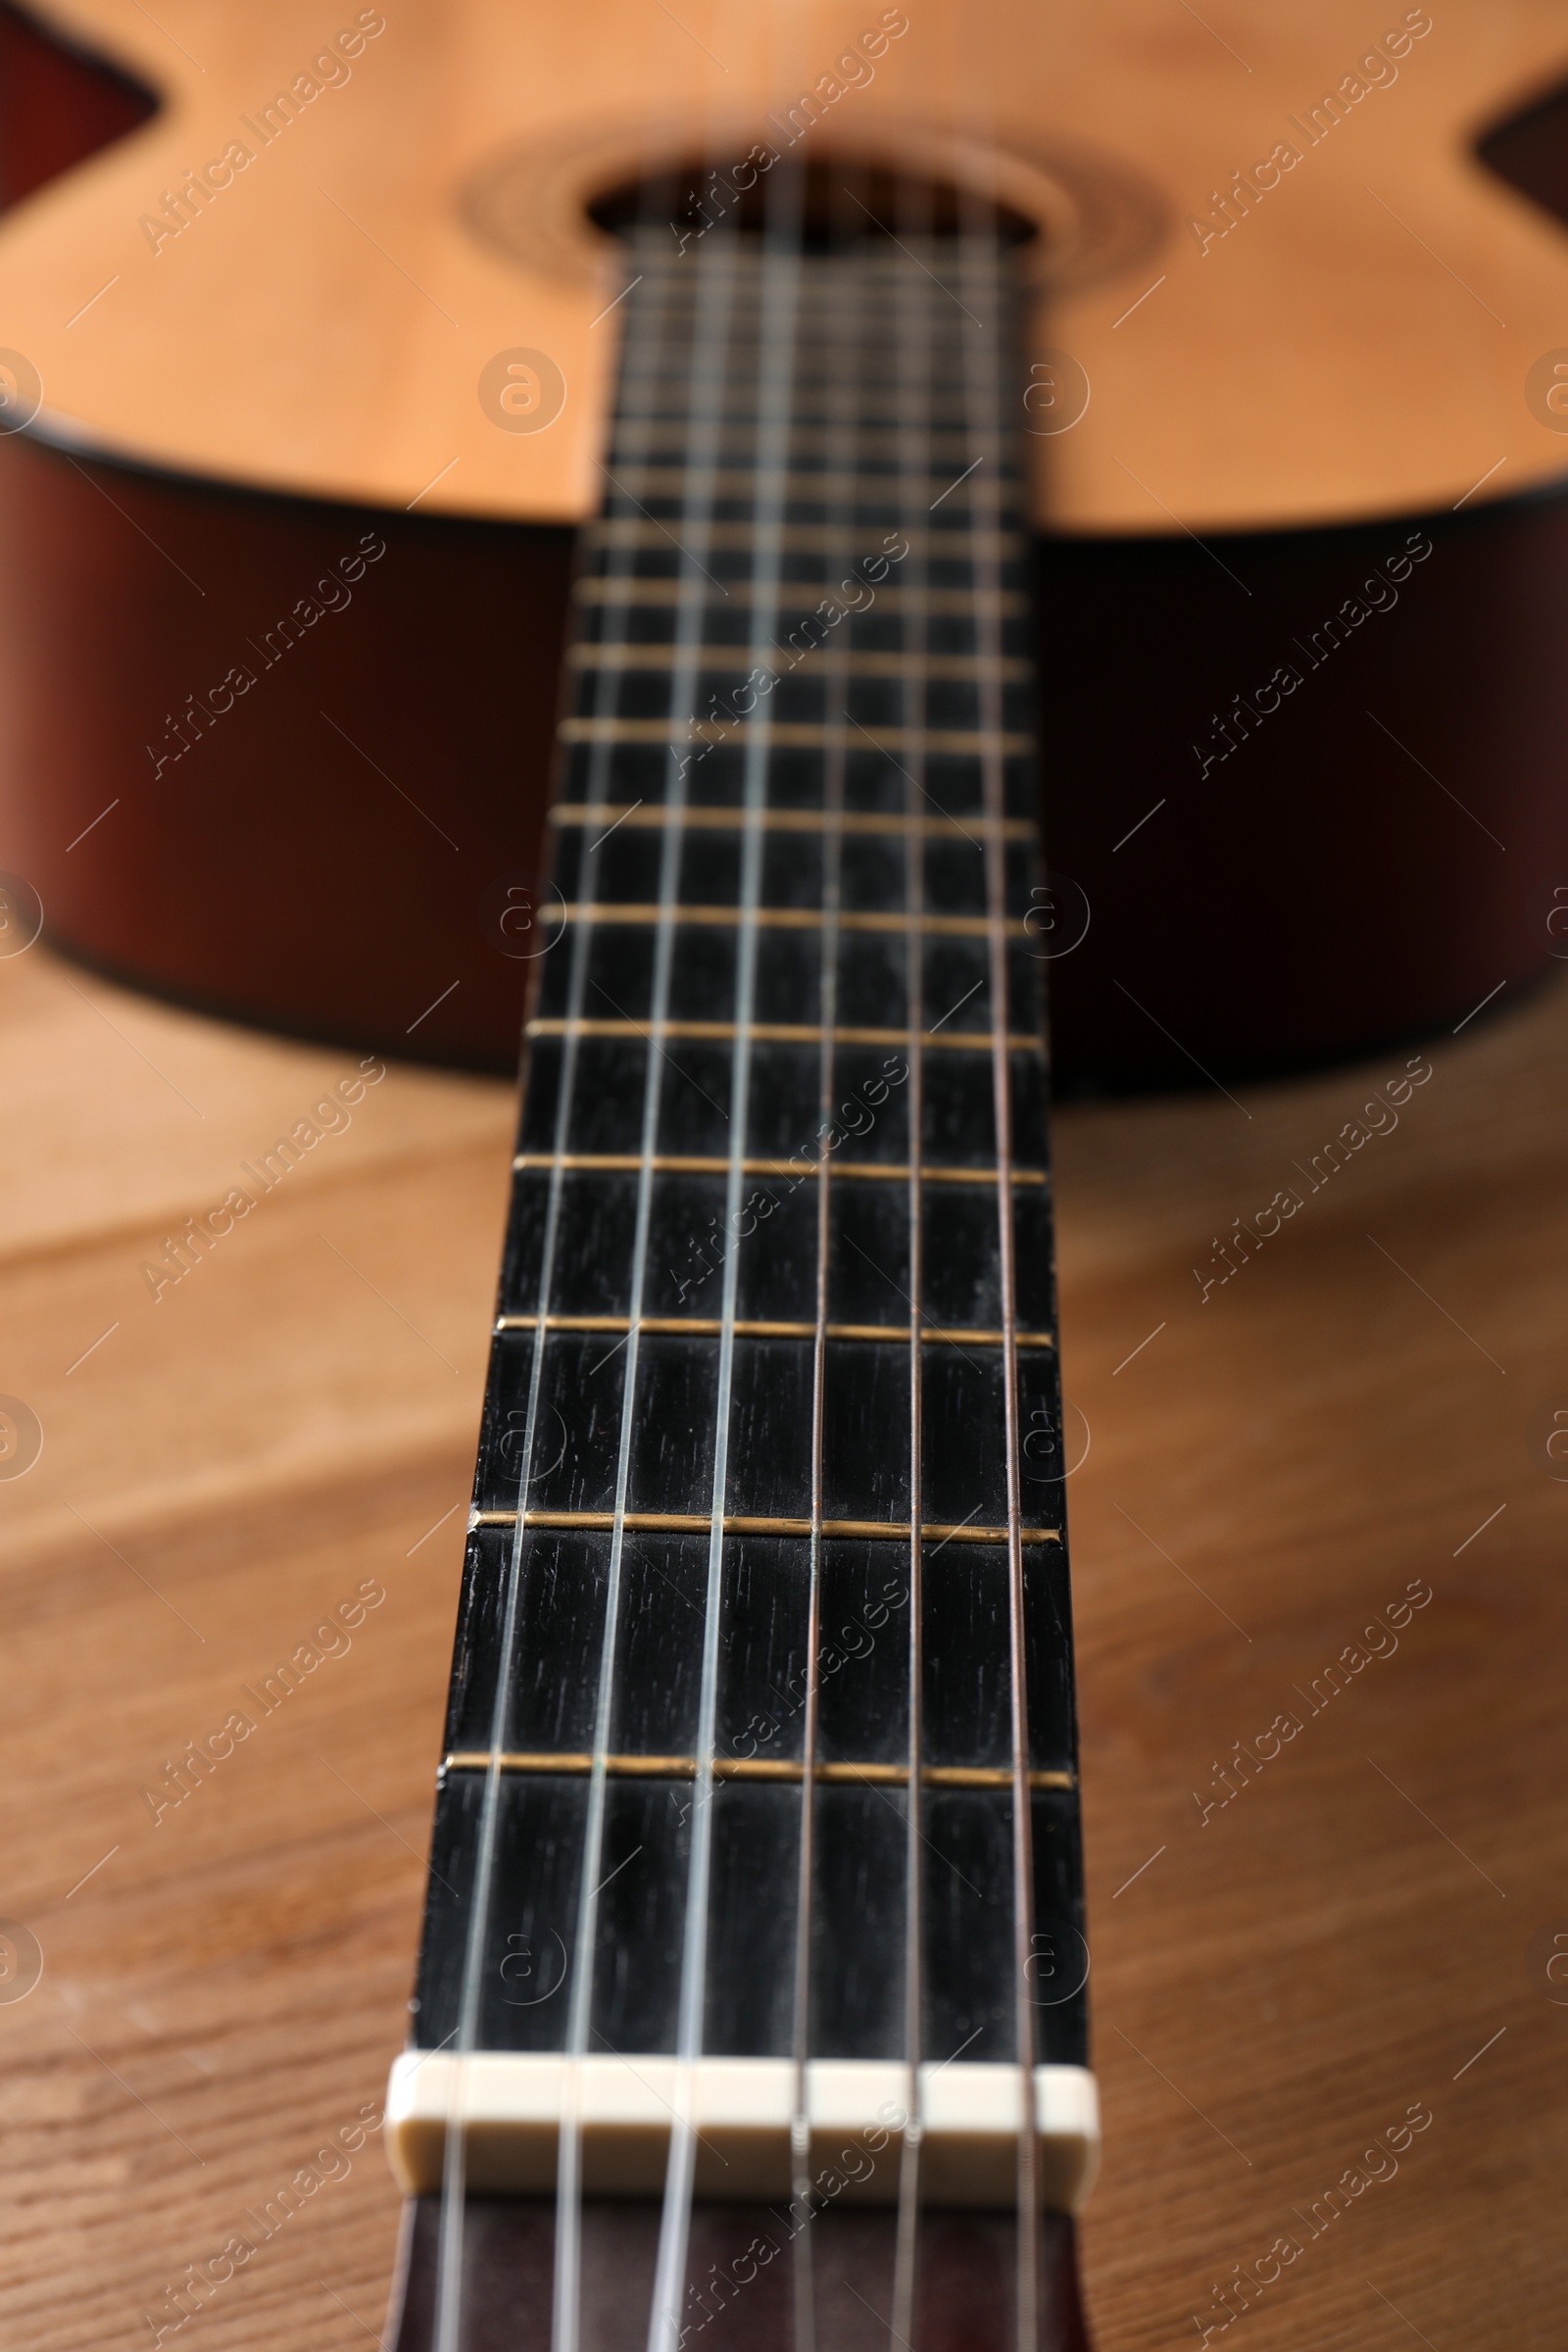 Photo of Beautiful classical guitar on wooden background, neck with strings in focus